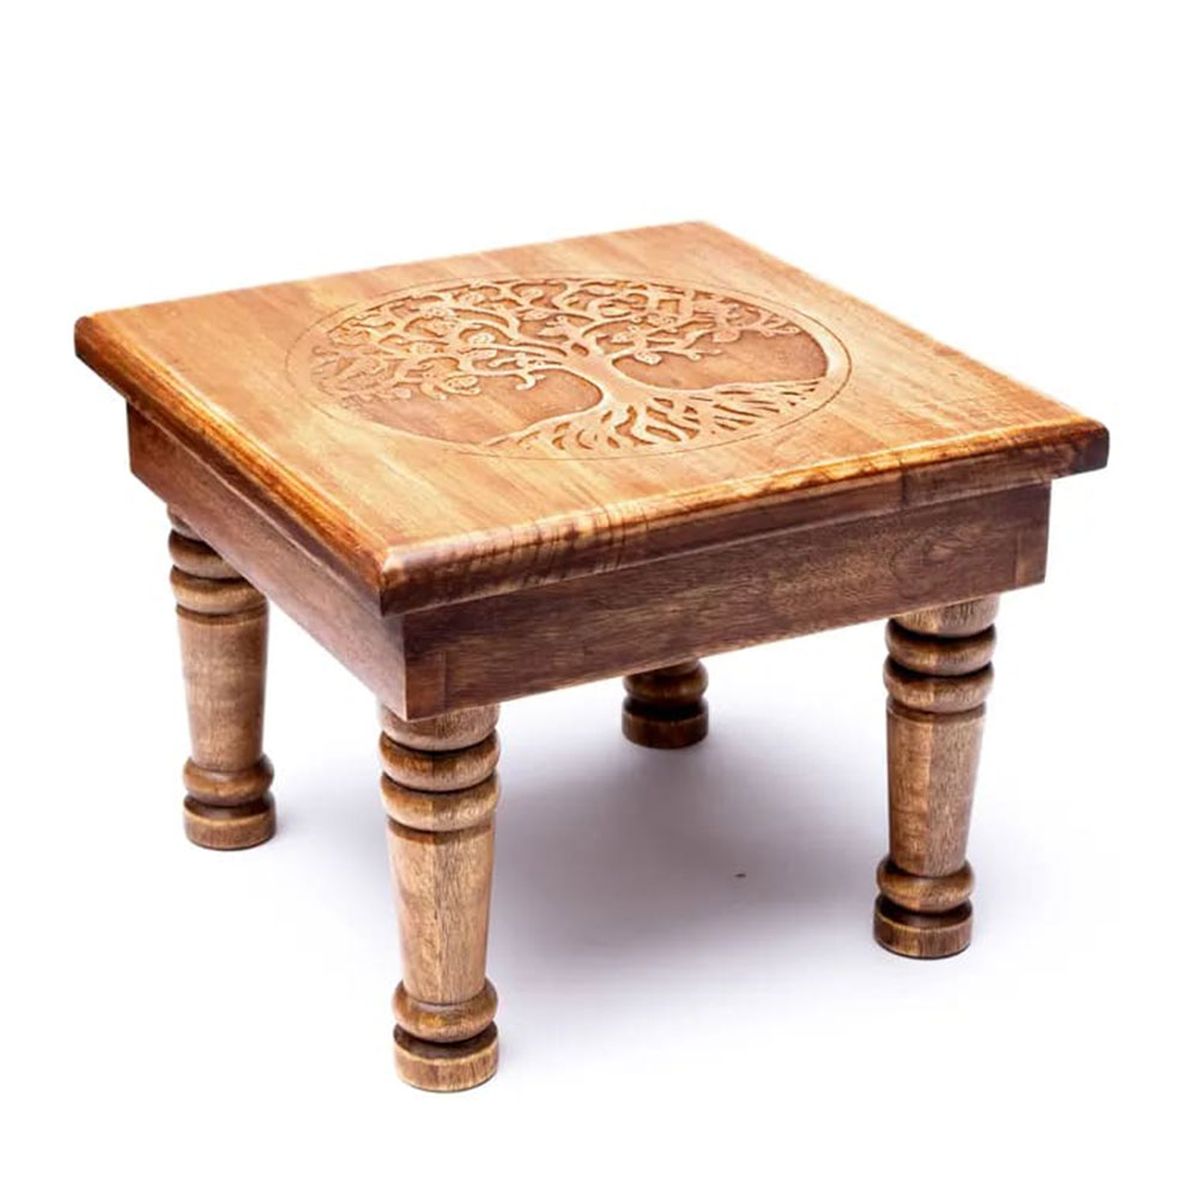 Mini Wooden Side Table Tree of Life